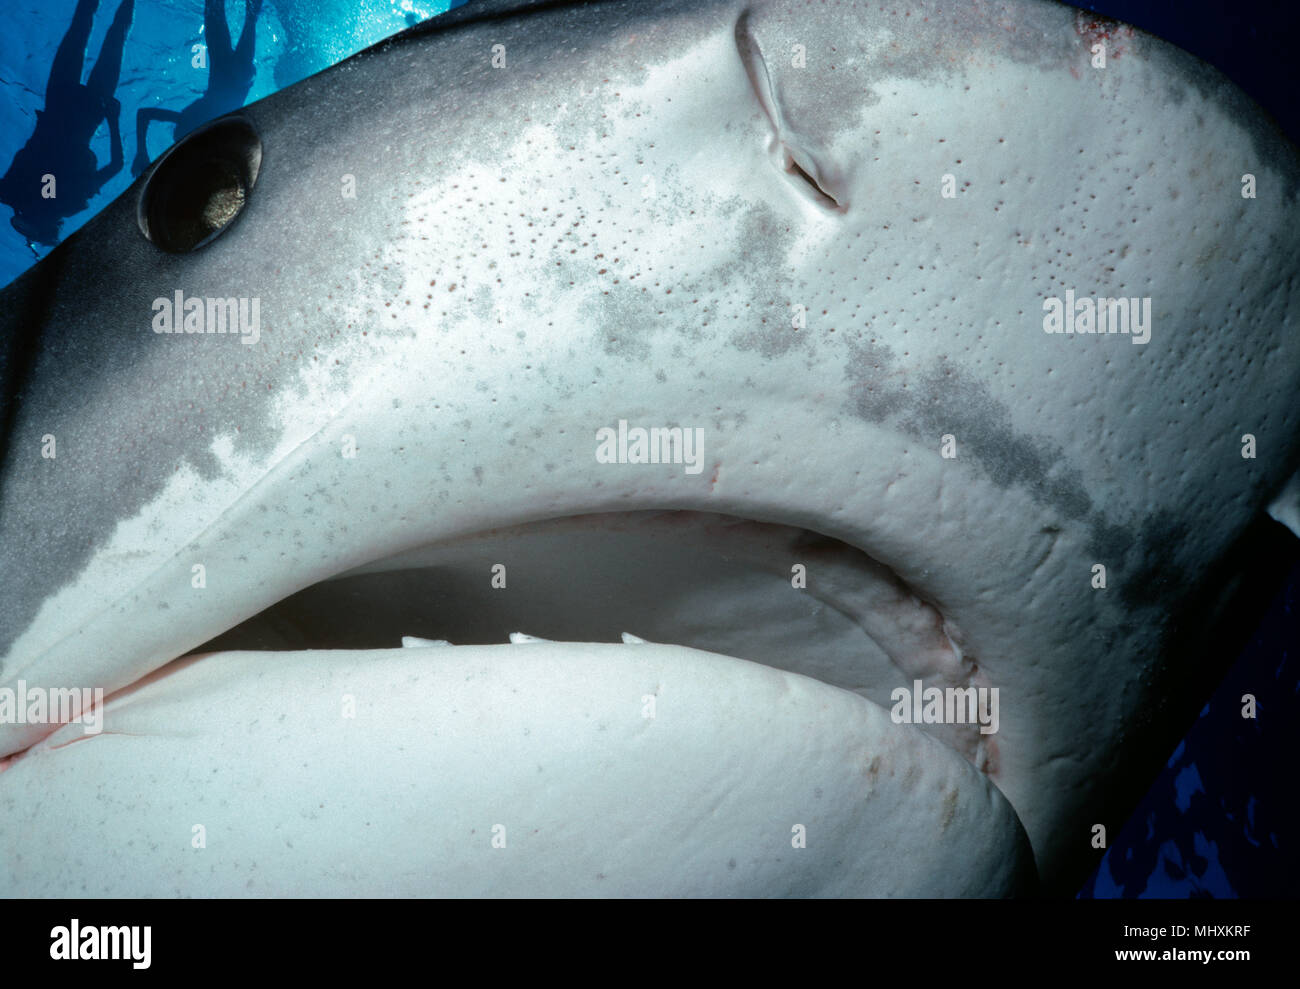 Face of a Tiger Shark (Galeocerdo cuvier). Egypt, Red Sea.    Image digitally altered to remove distracting or to add more interesting background. The Stock Photo